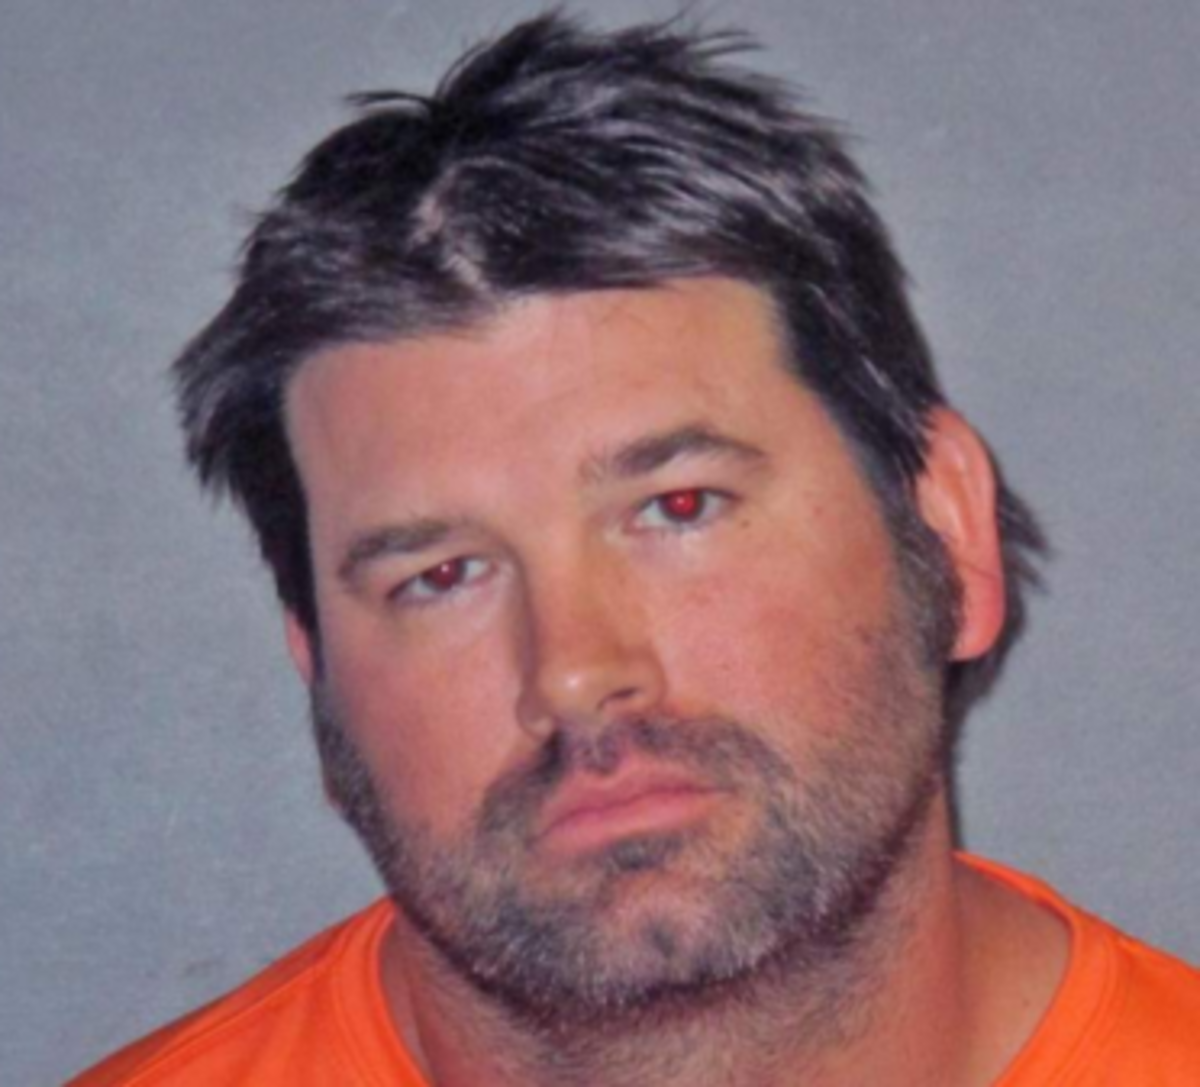 Everett L.Beauchamp arrested after assaulting another person after his Florida shirt was commented on.